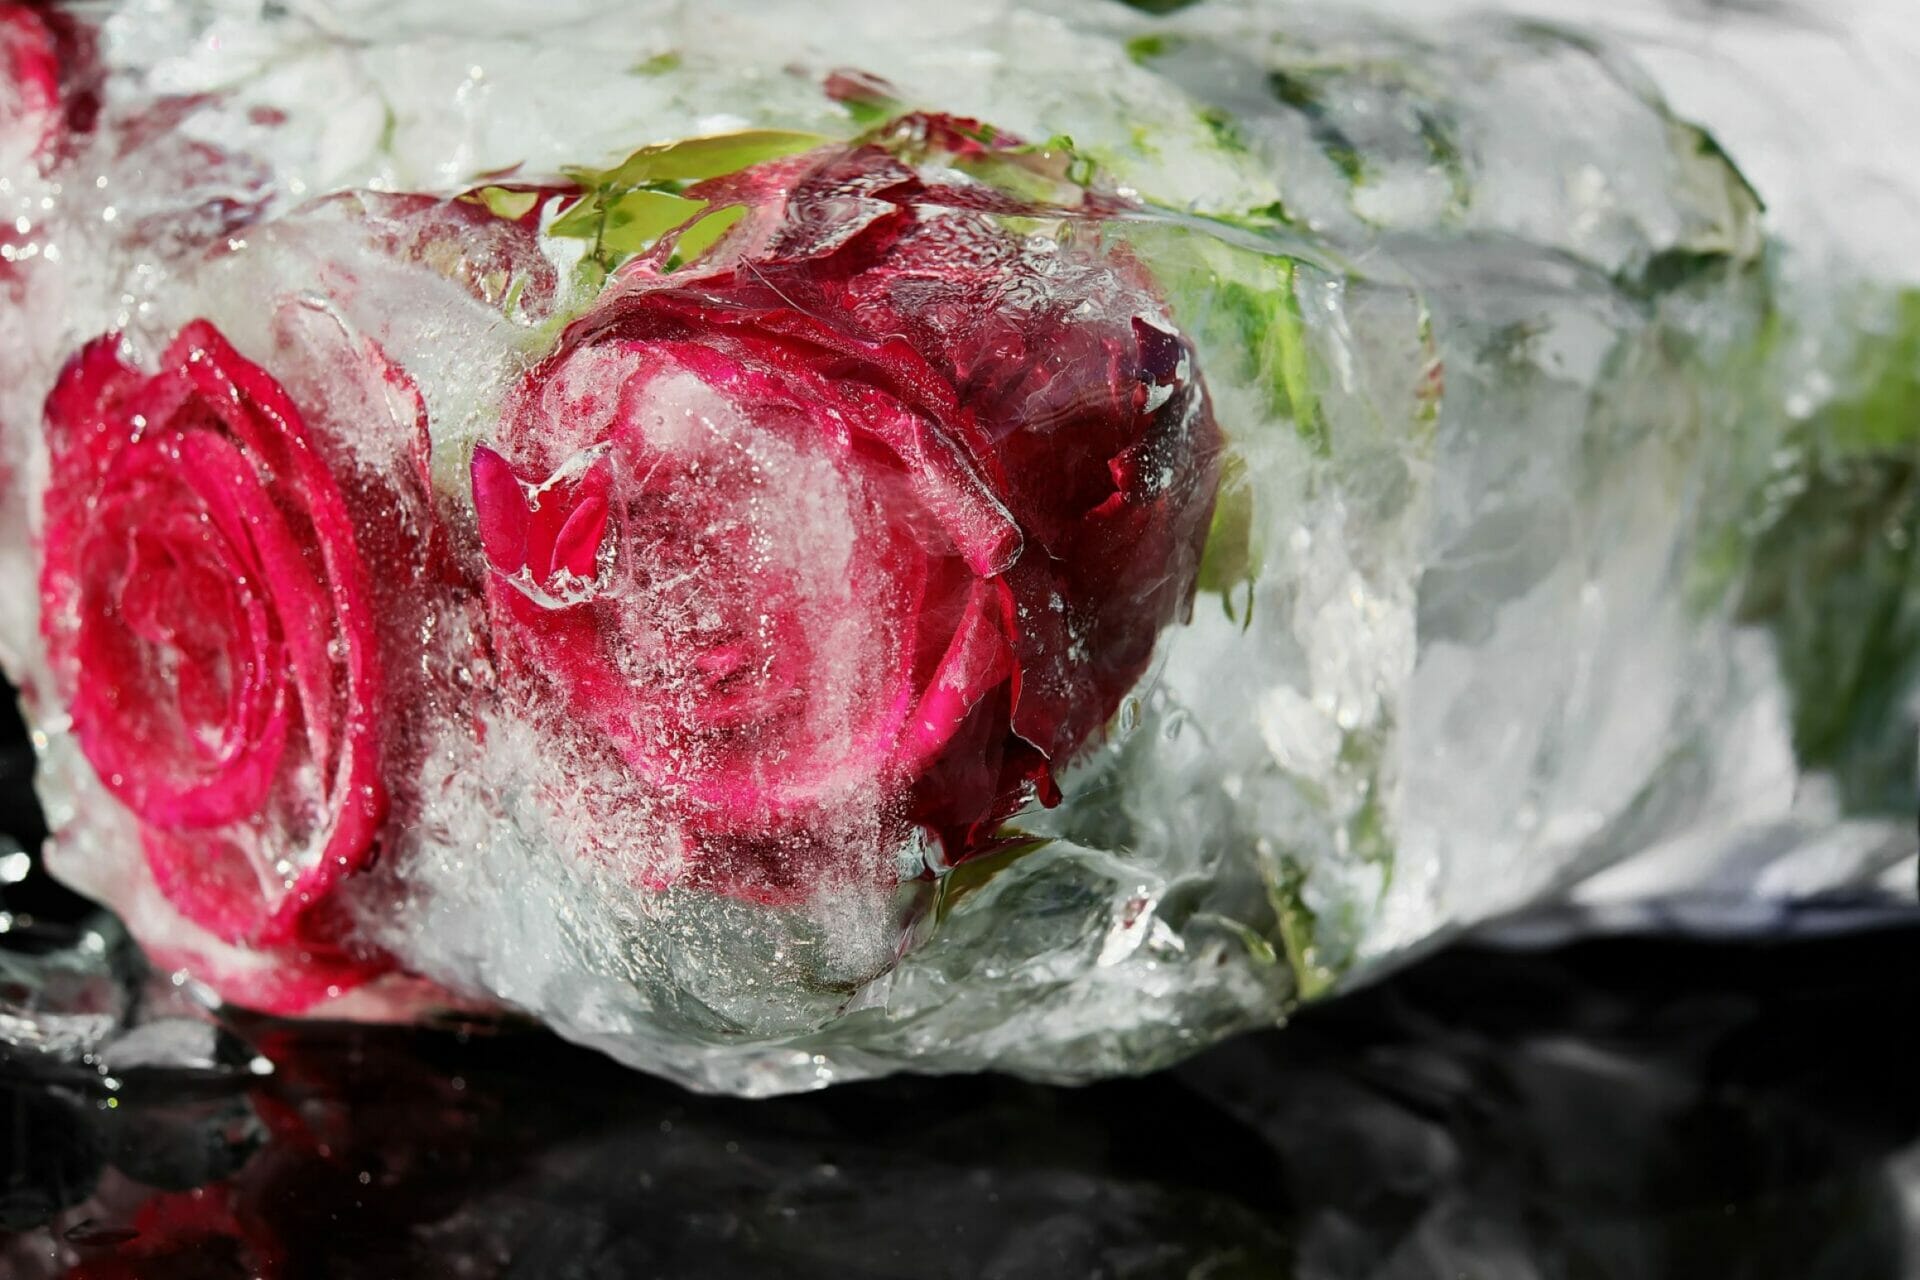 frozen roses - Is Your Career “Stuck?” Here’s What to Do About It.